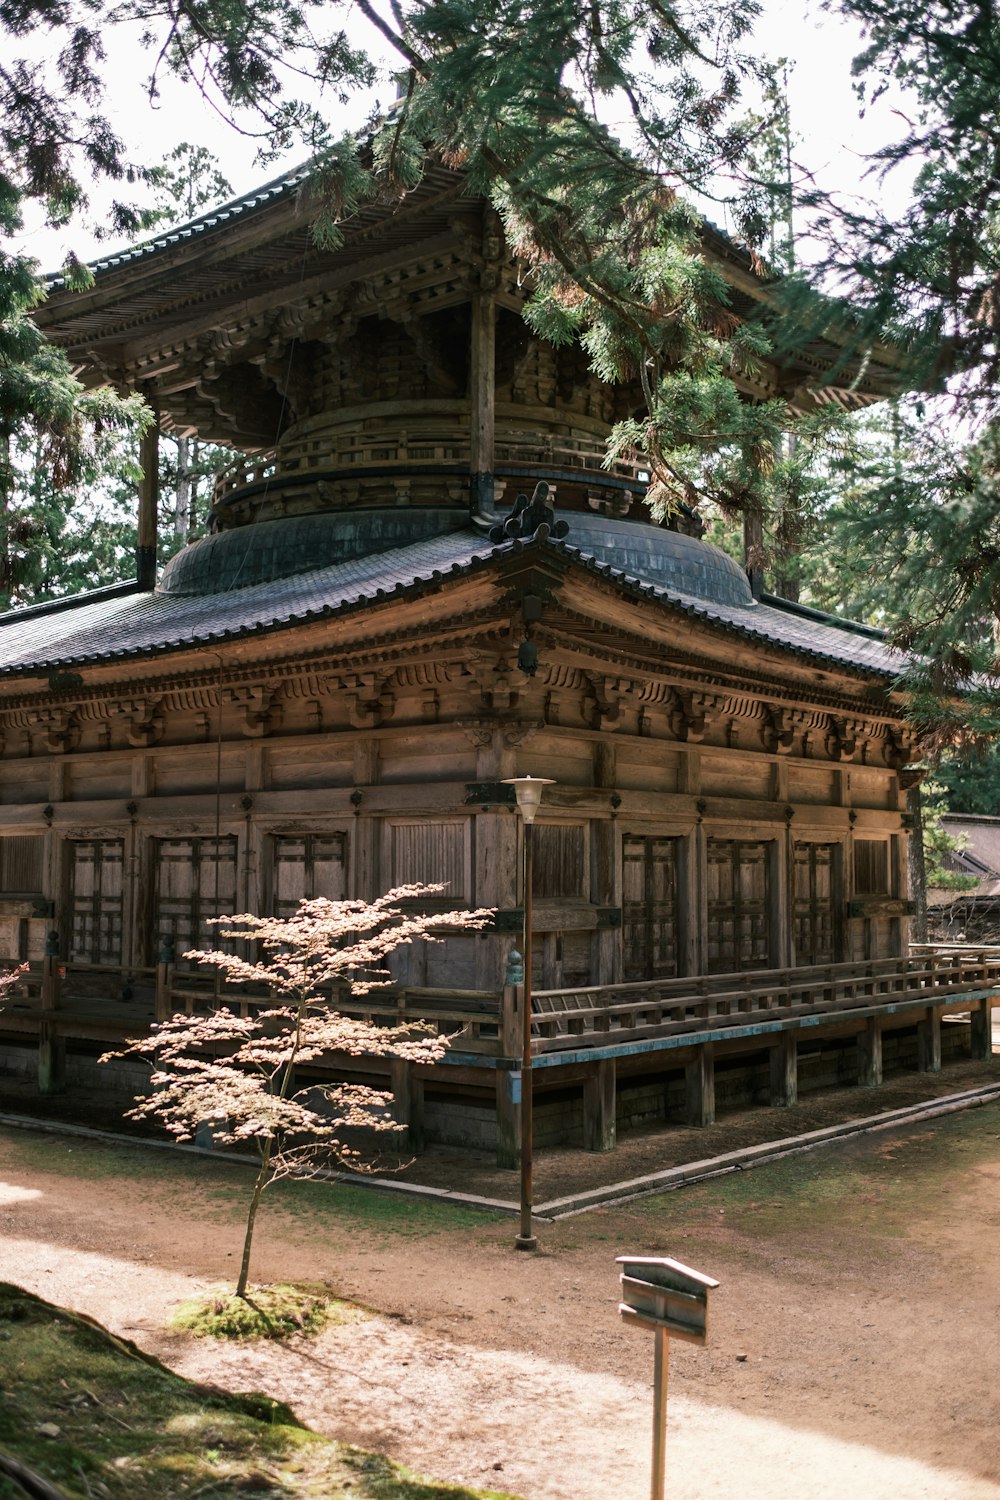 a wooden building with a tall tower in the middle of a forest